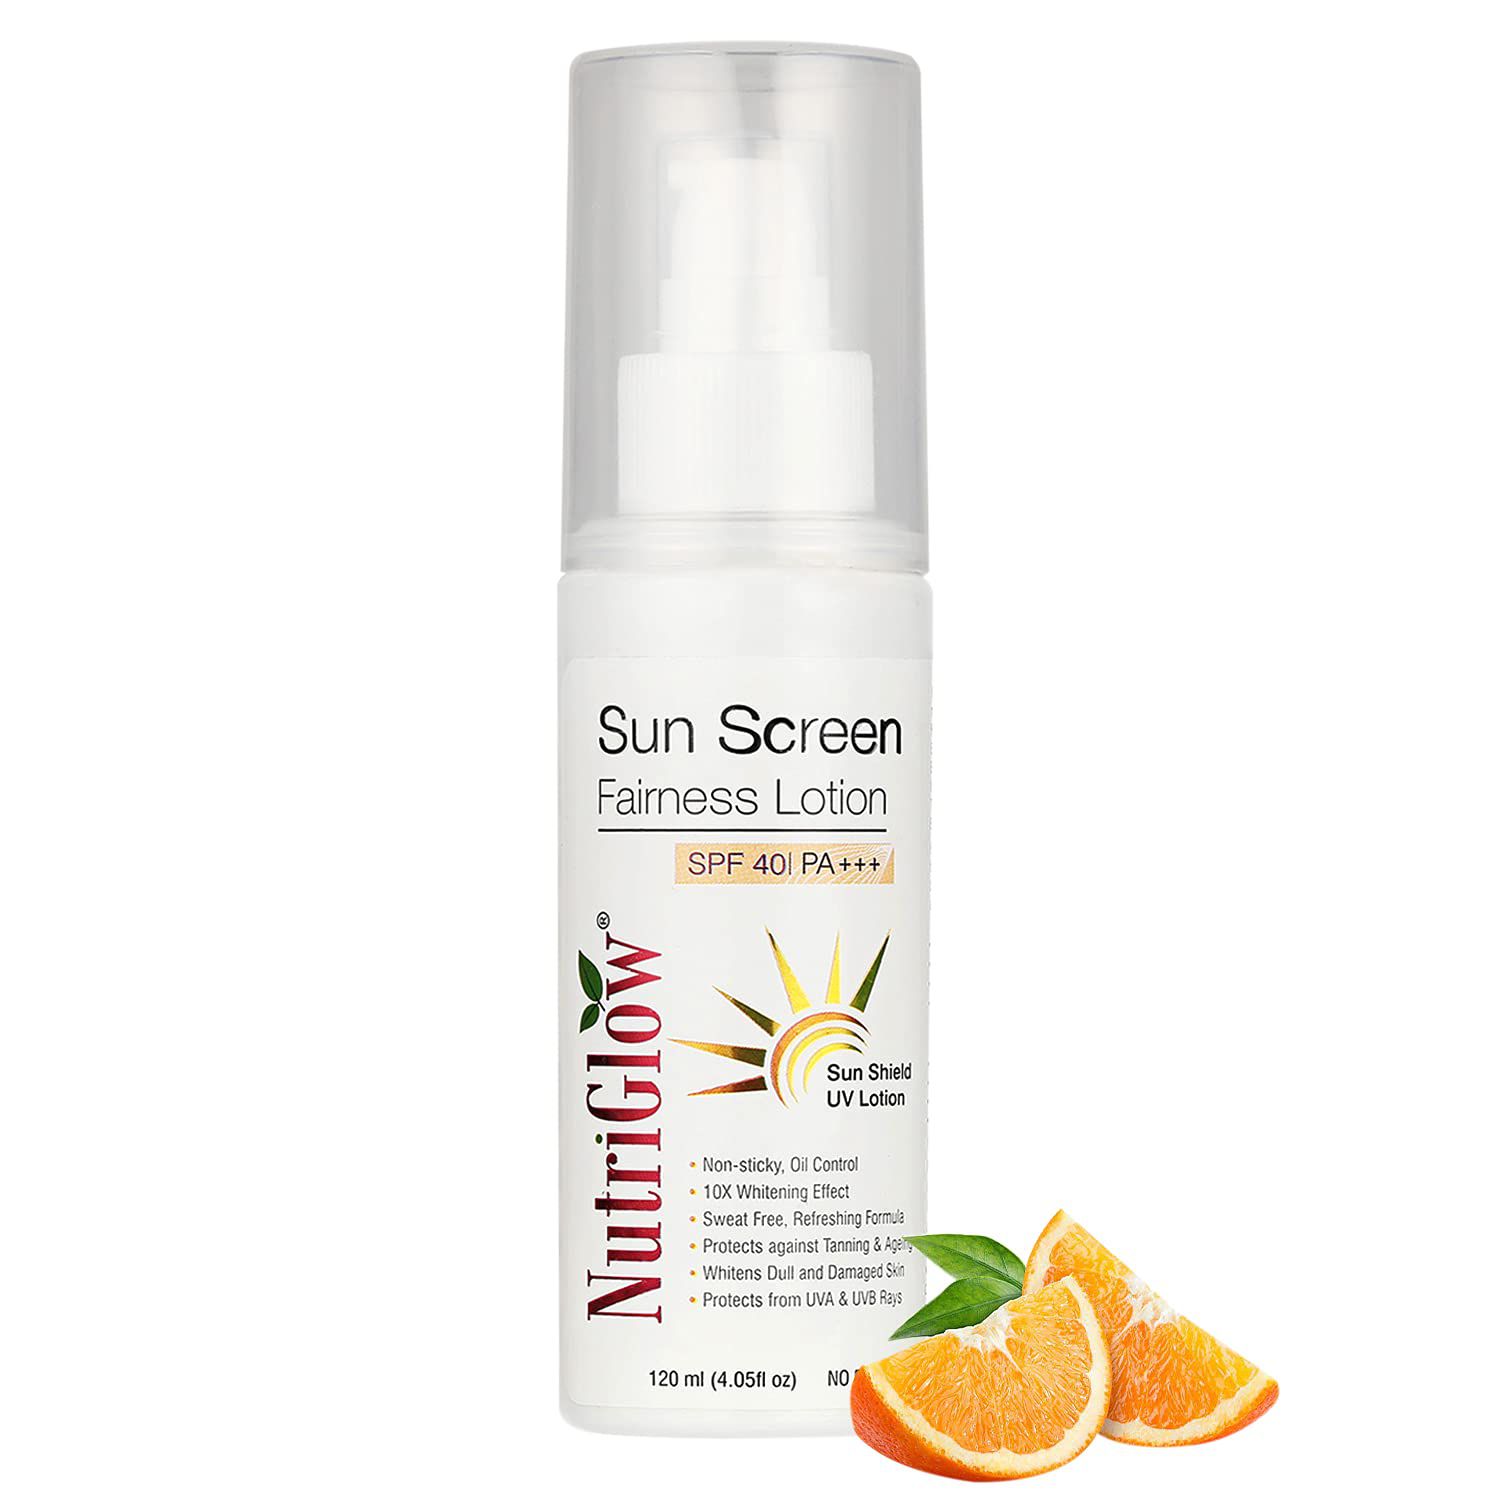     			Nutriglow SunScreen Fairness Lotion SPF 40 PA+++ Protect from UVA and UVB Rays 120 mL